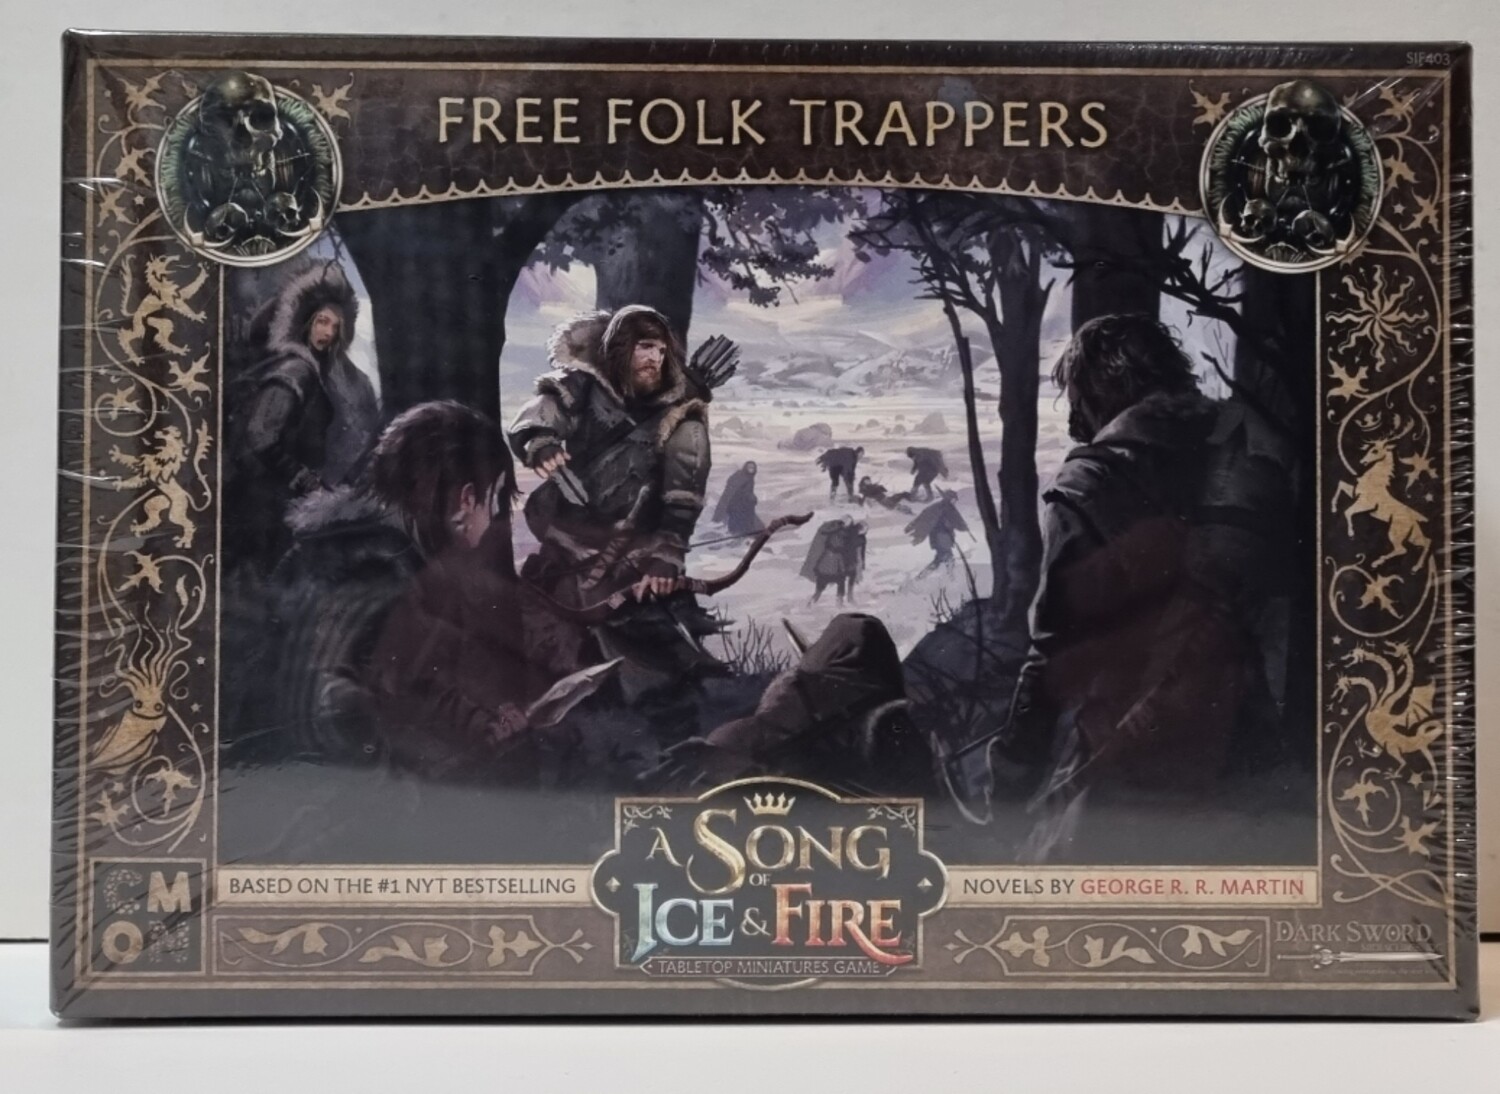 A Song of Ice & Fire, SIF403, Free Folk Trappers